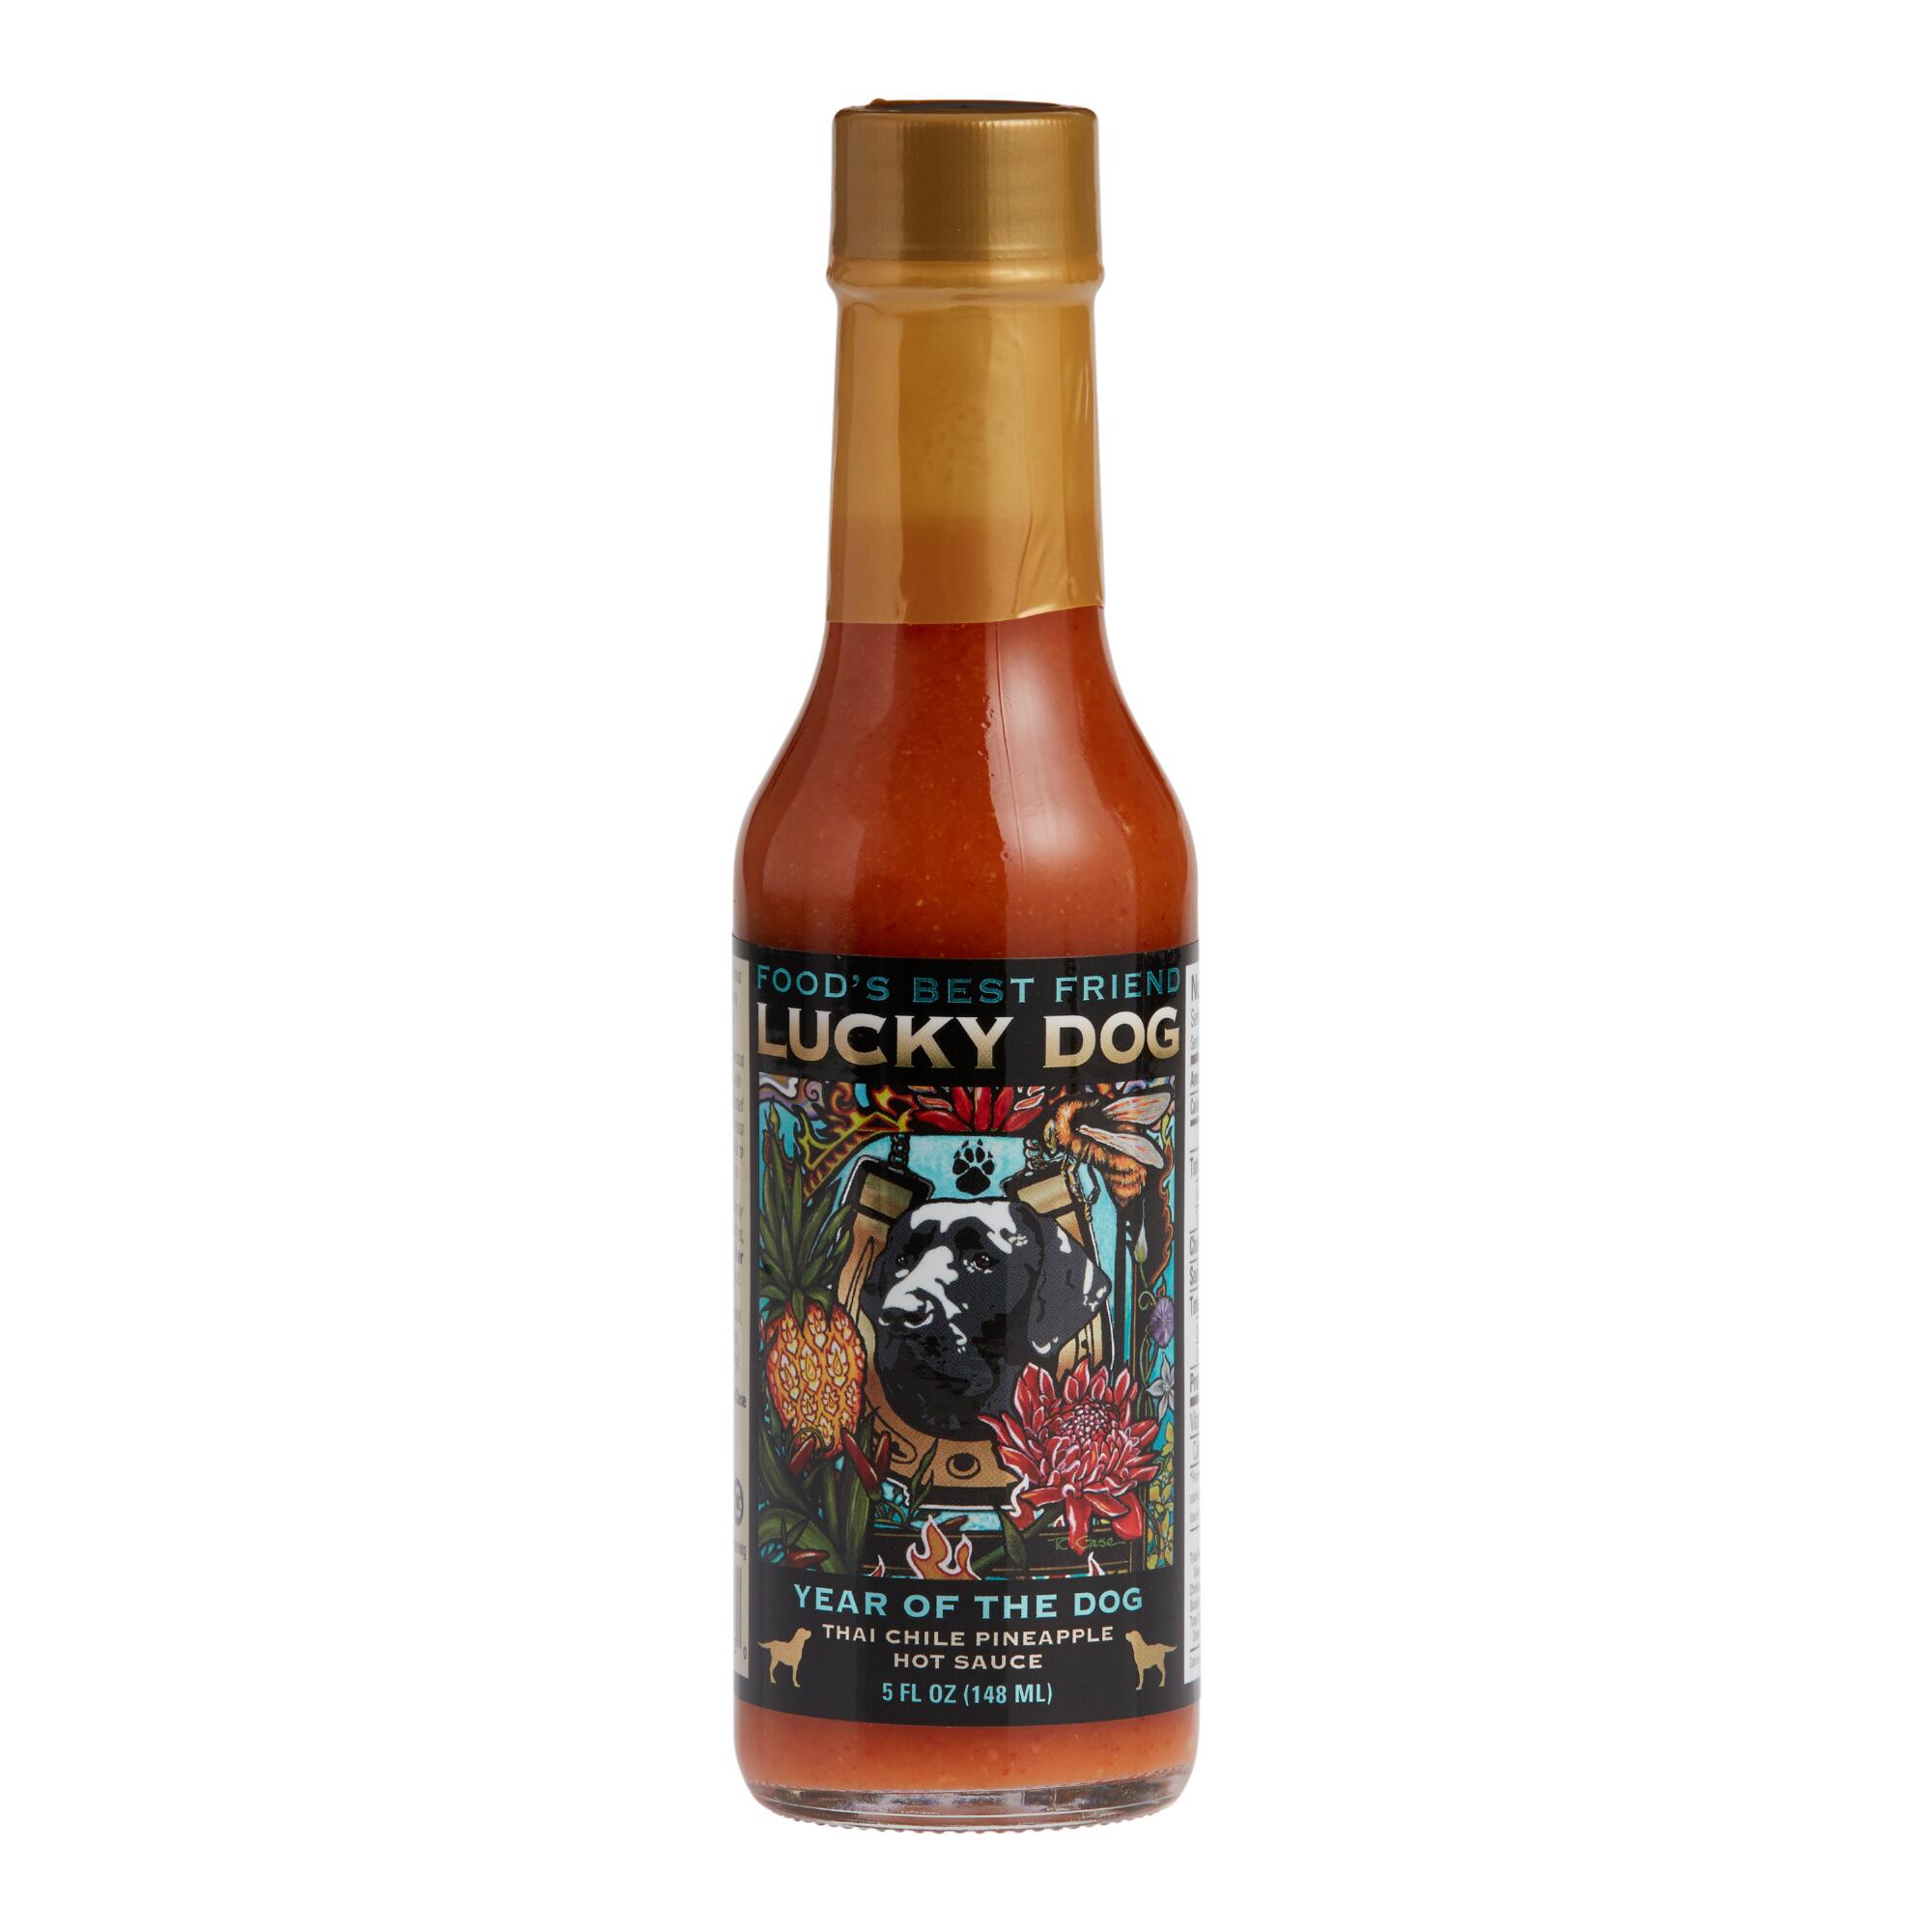 Lucky Dog Year of the Dog Thai Chile Pineapple Hot Sauce by World Market